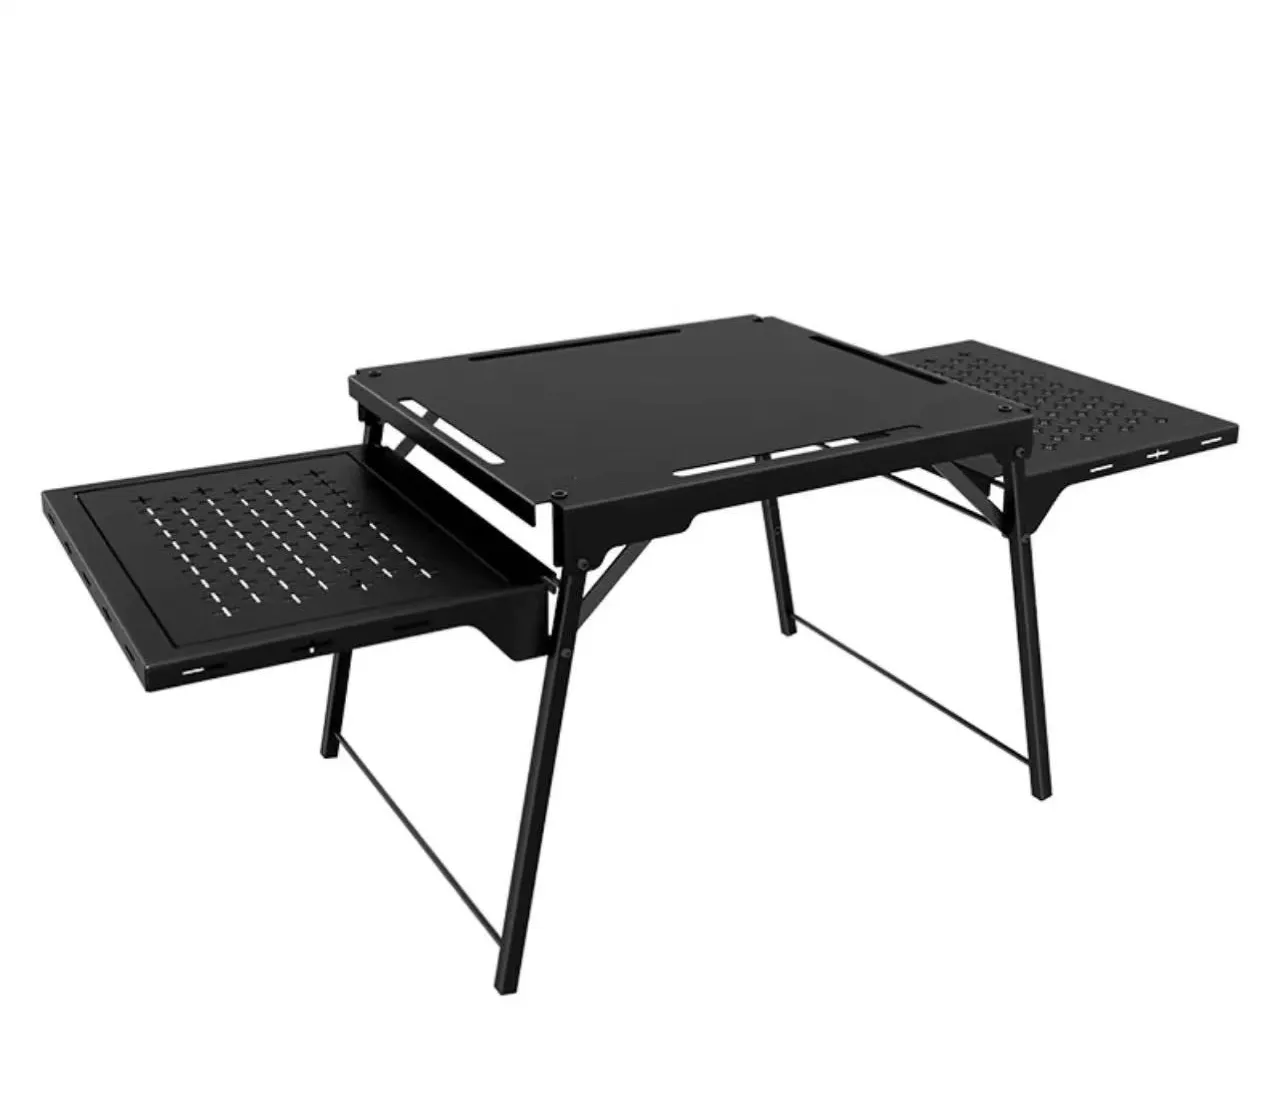 SM-IGTN Metal Portable Camping Kitchen Table Essential One-Stop Solution for Outdoor Multi-Functional Use